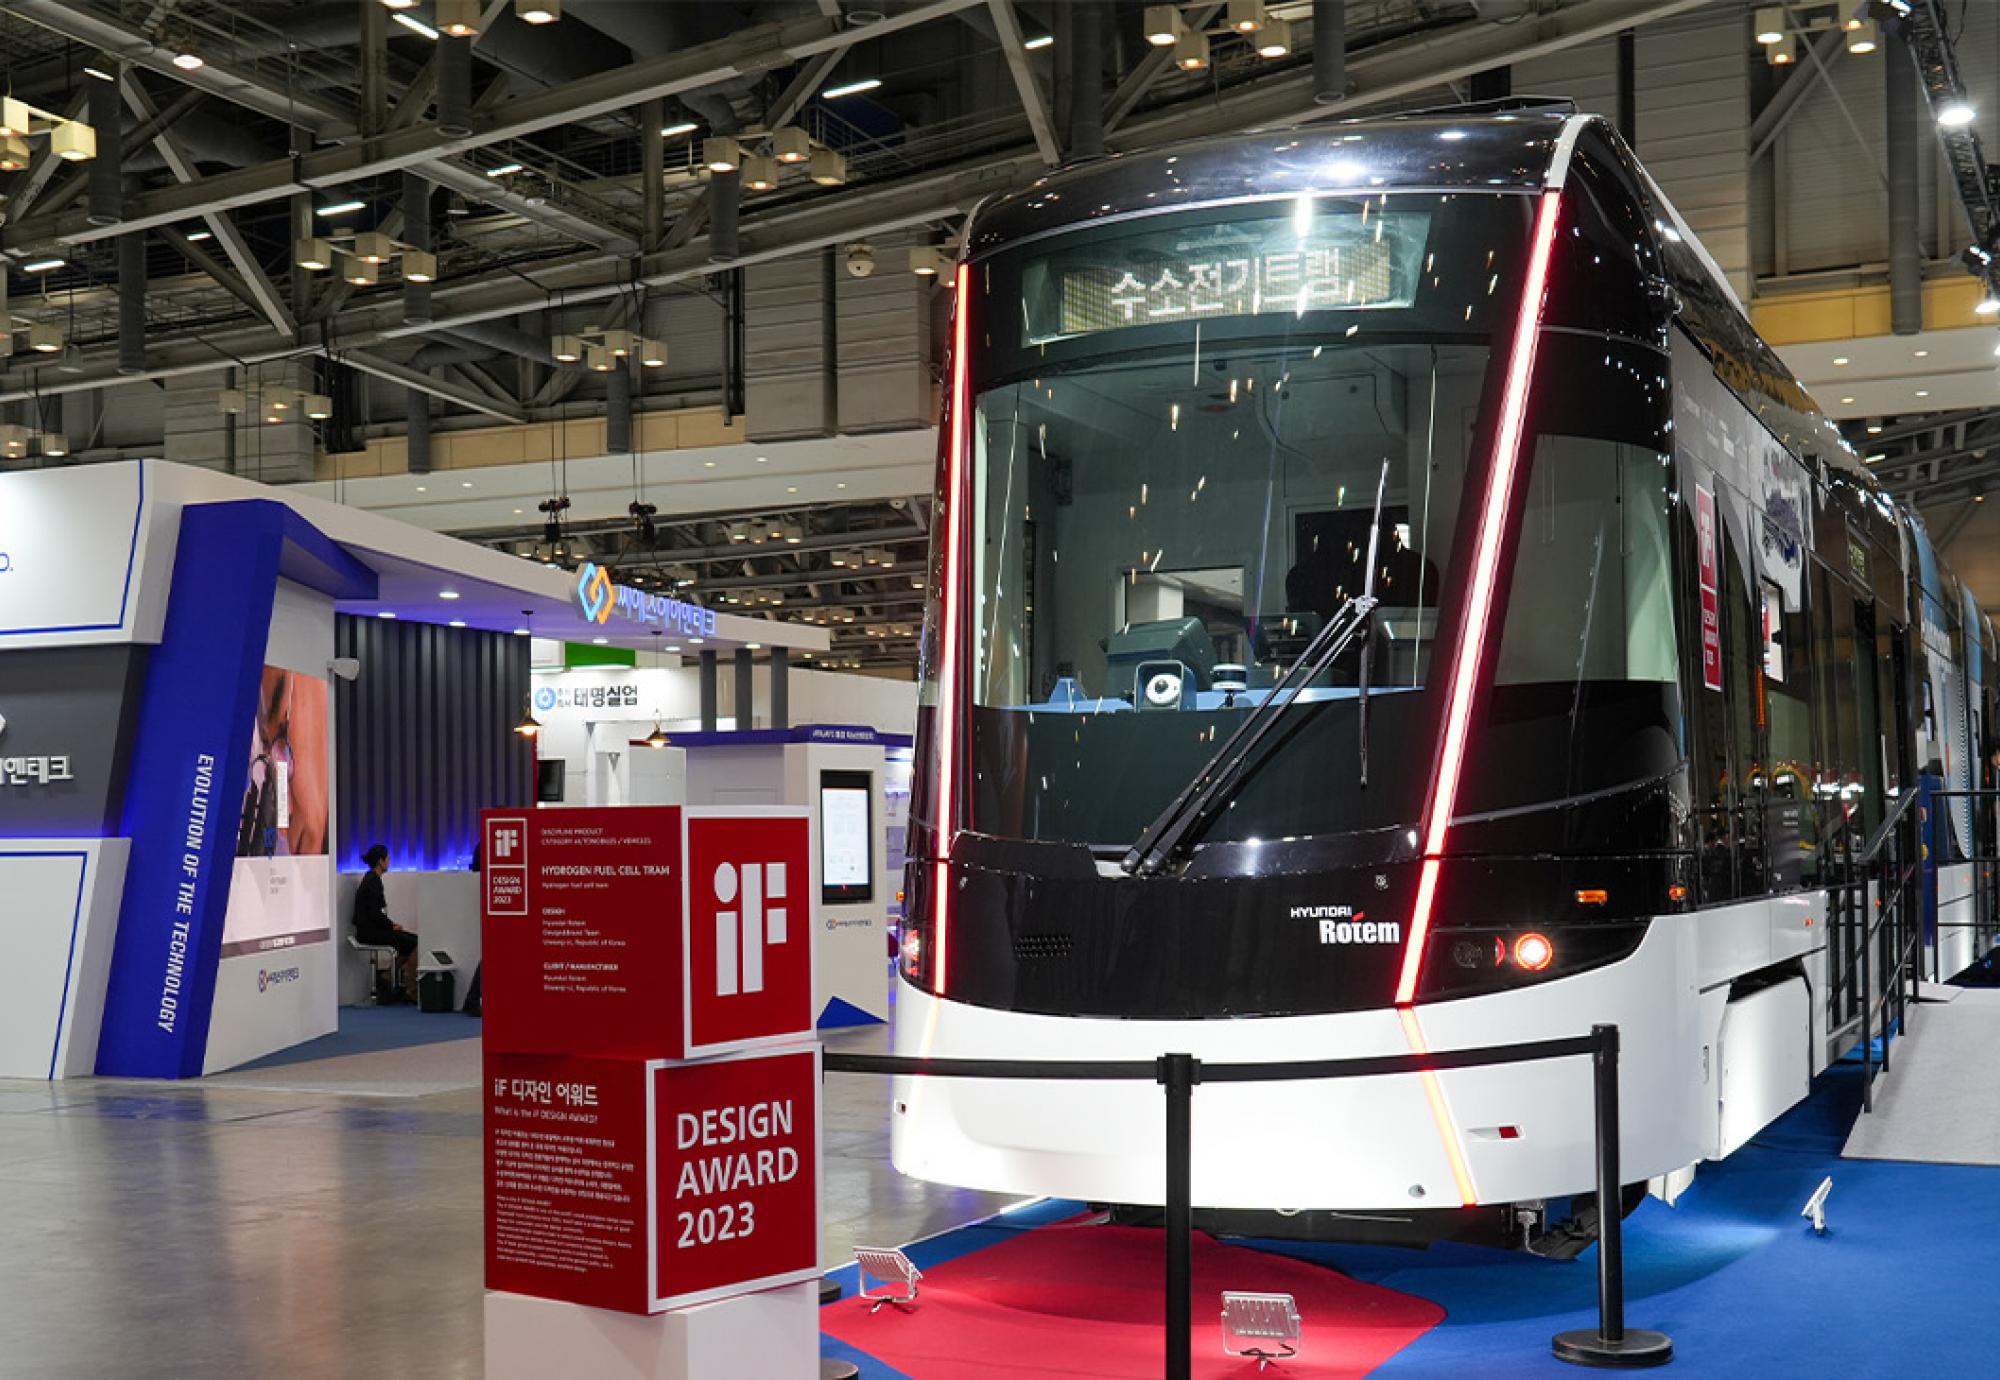 New hydrogen fuel cell tram unveiled by Hyundai